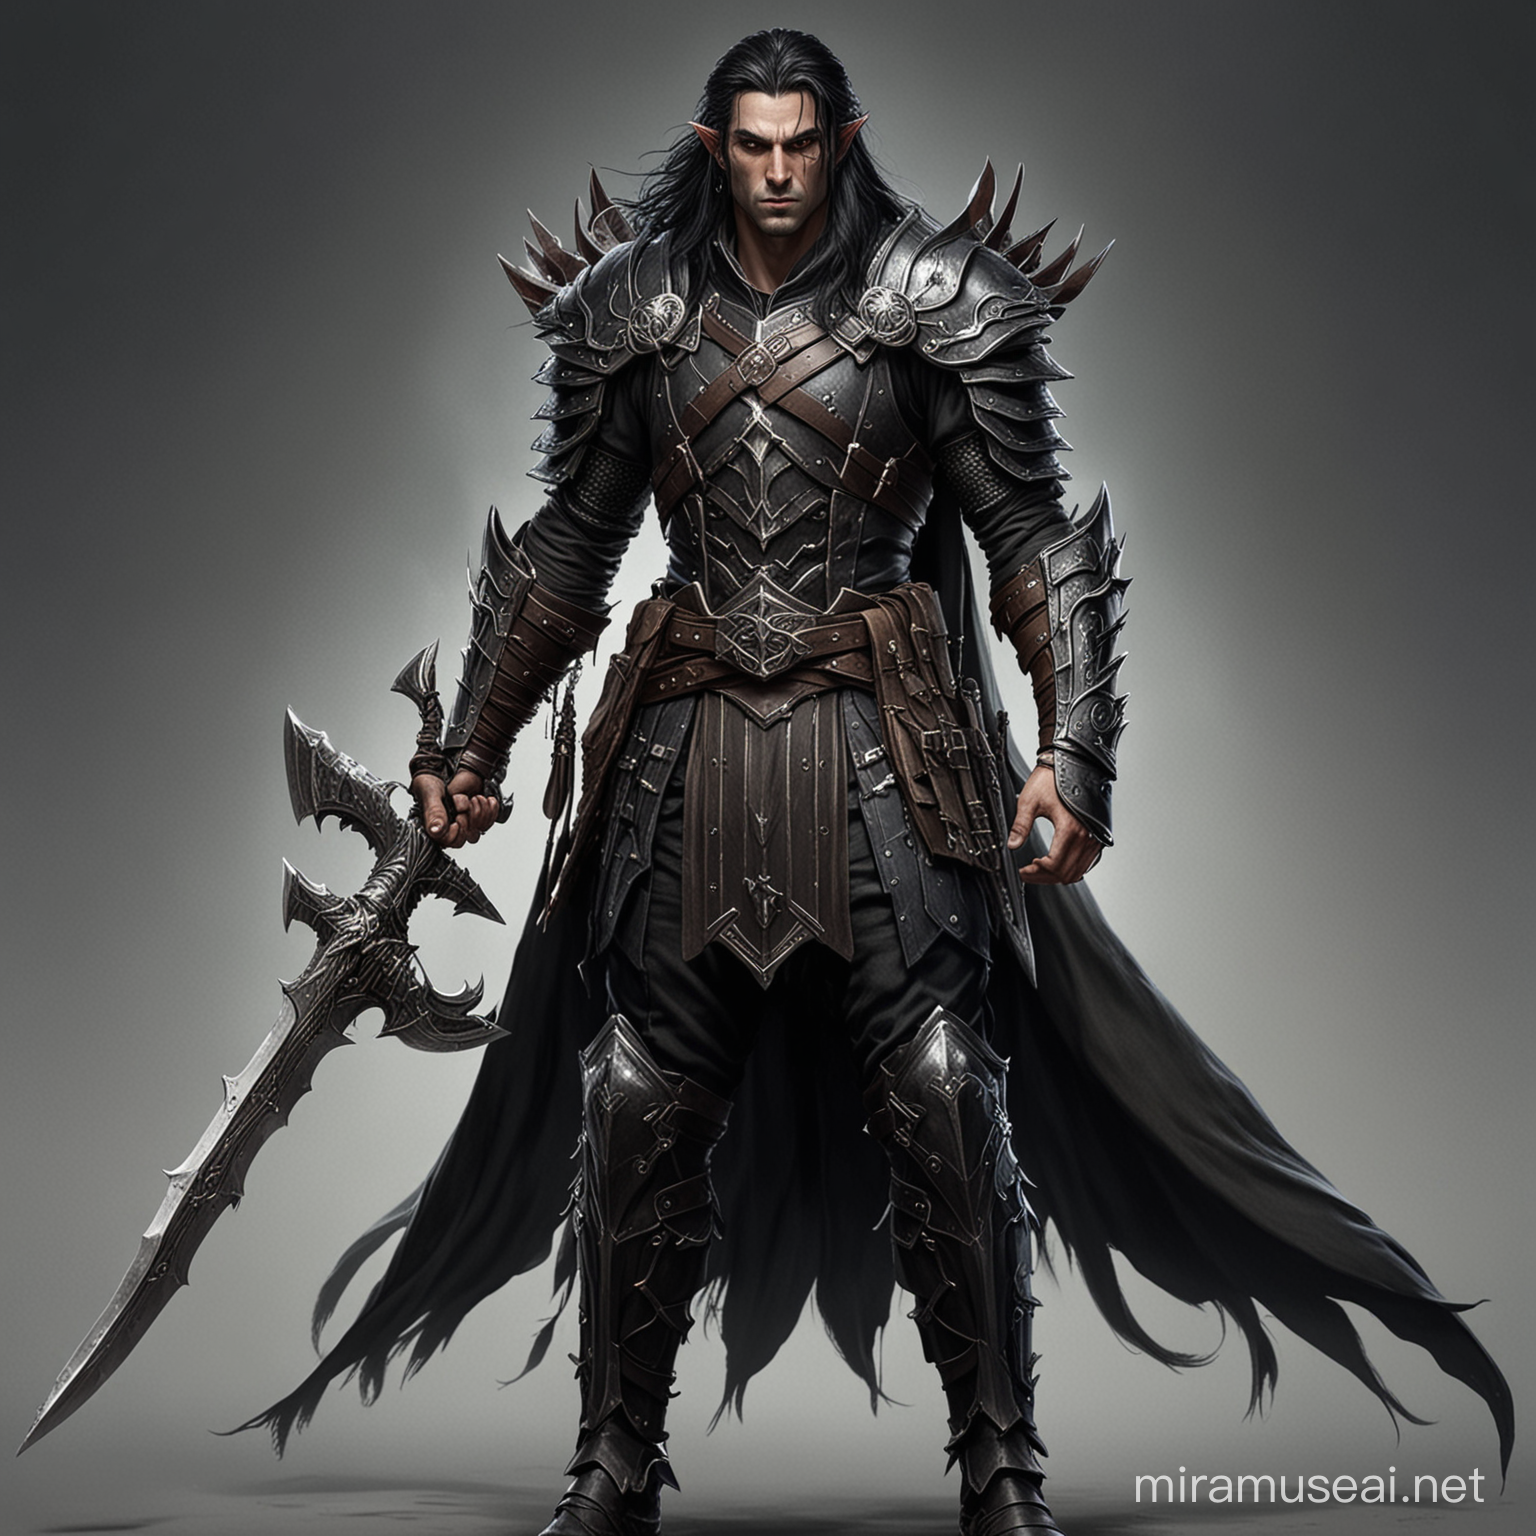 A tall elf warrior with long black hair. He is equipped with dozens of different weapons, enough to supply an army.